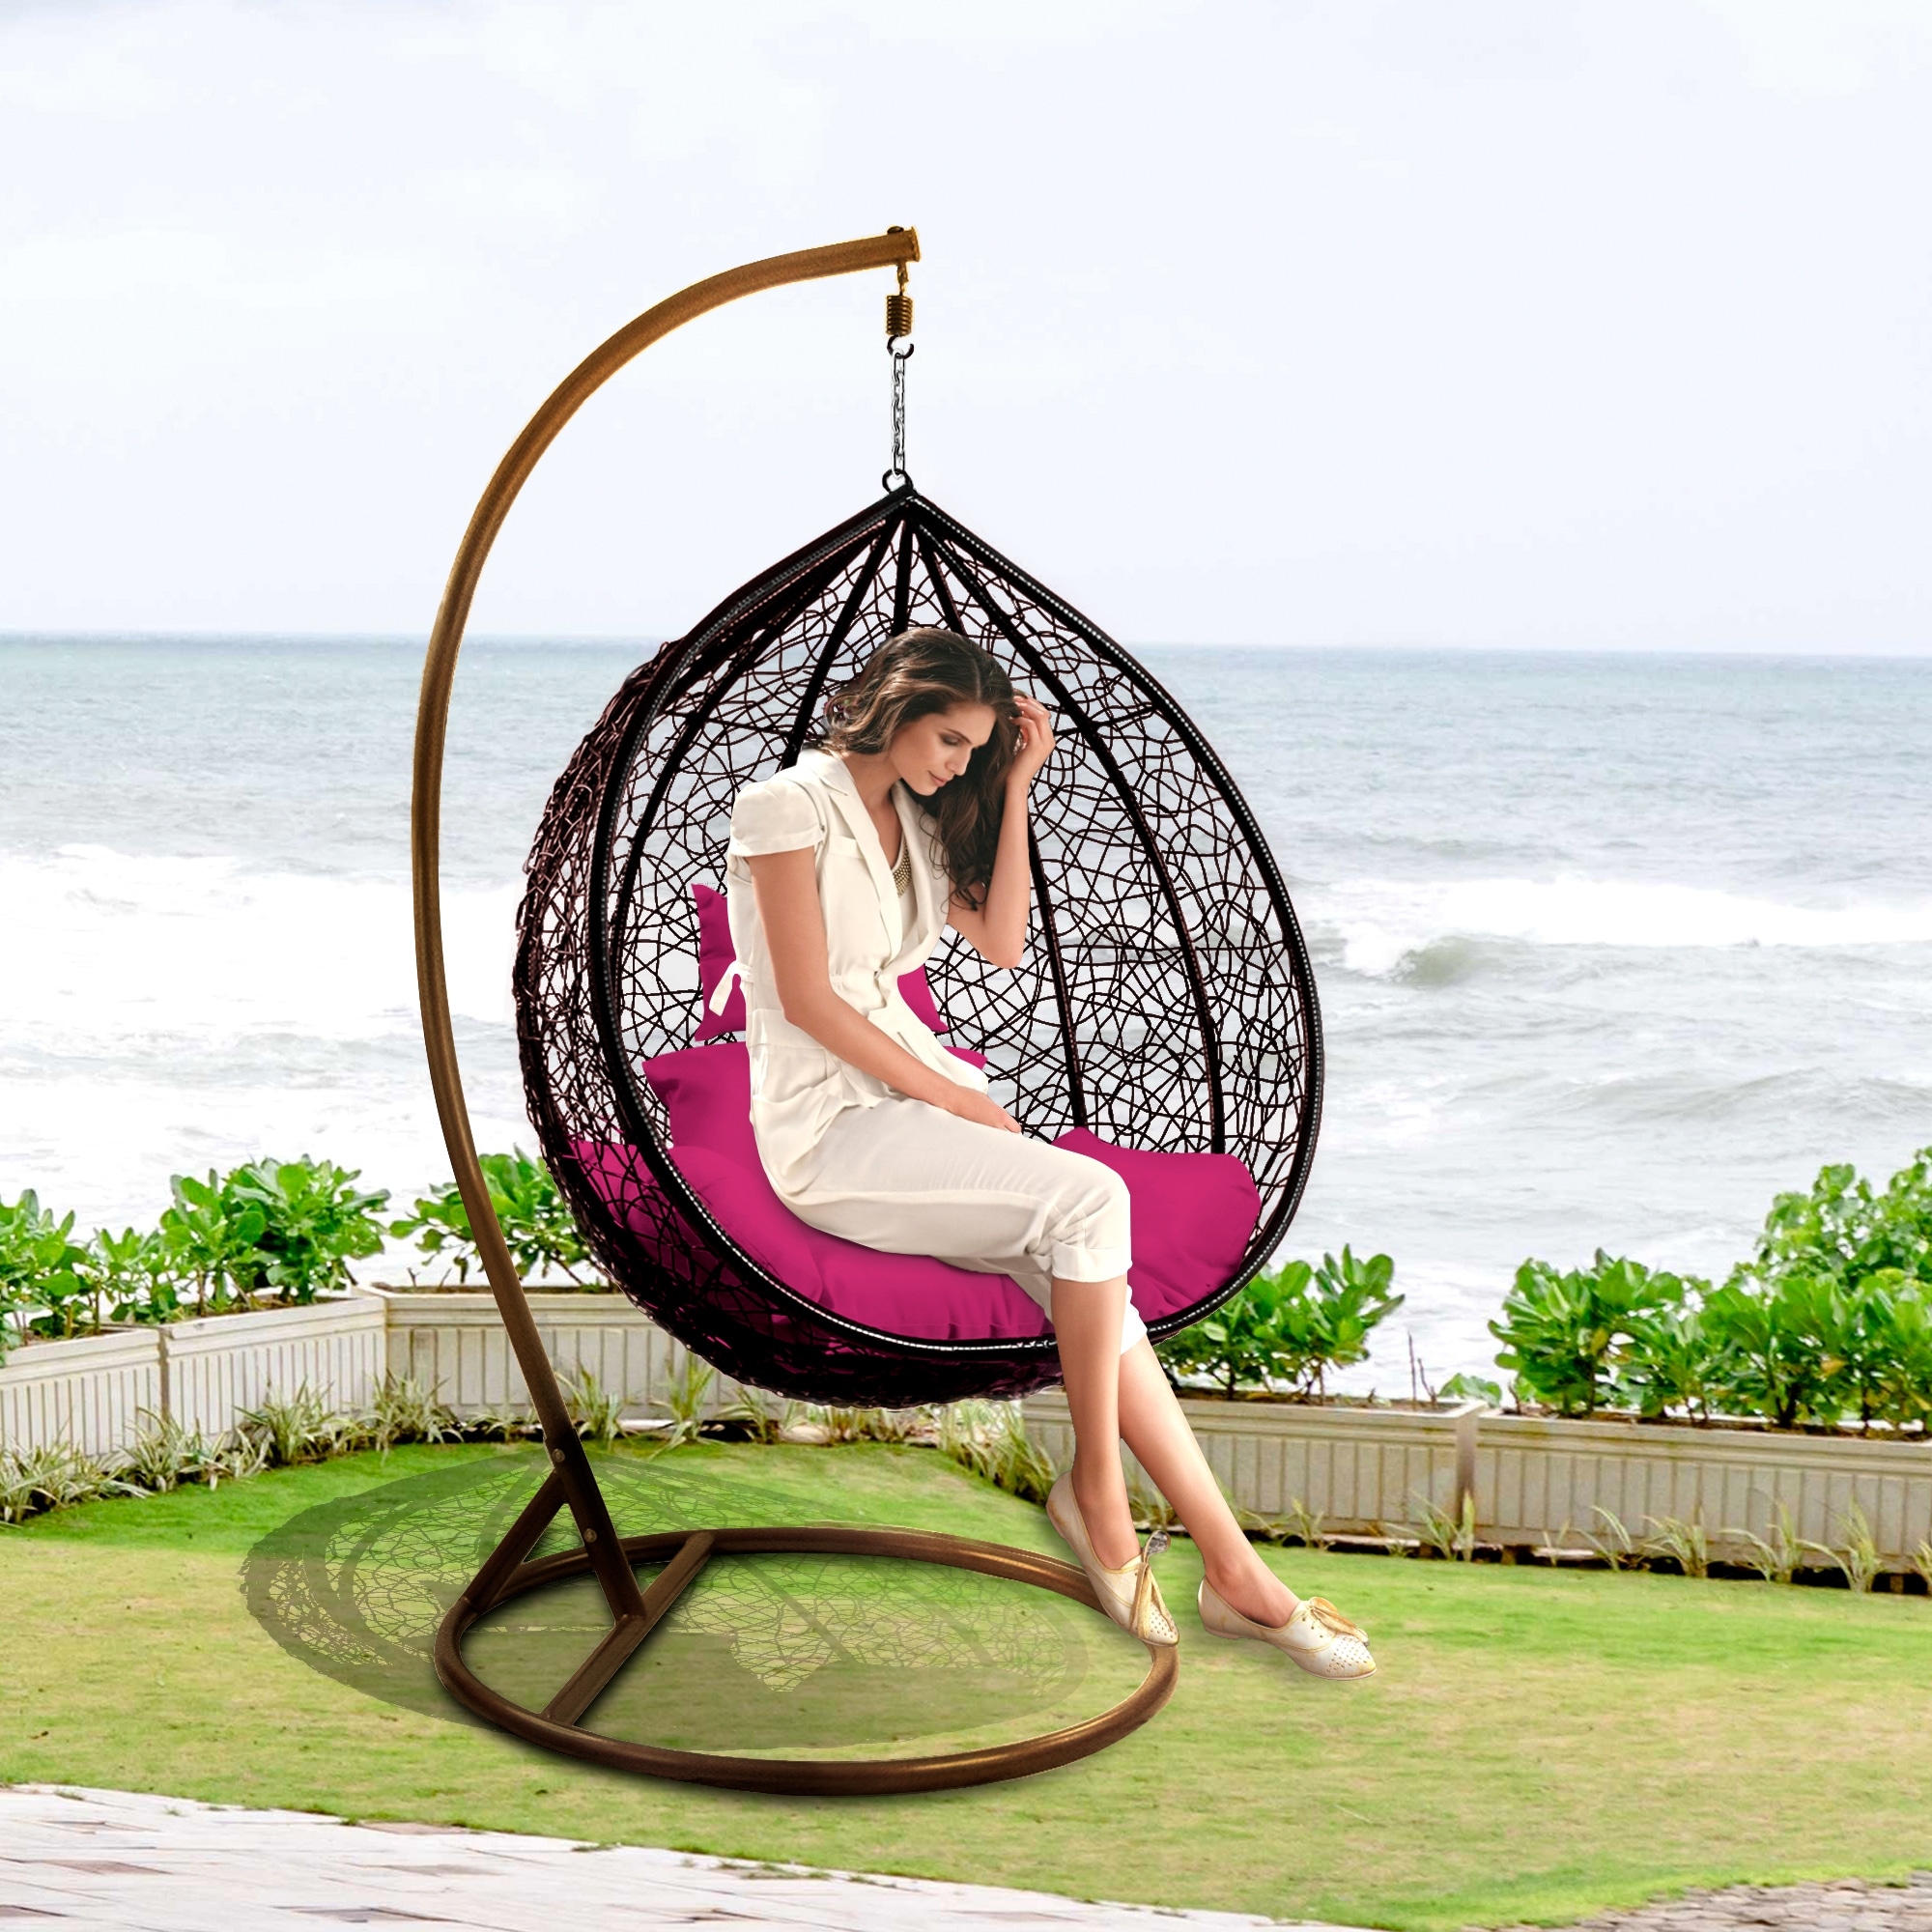 Platform Swing- 40x30 Hanging Outdoor Tree or Playground Rectangle Bench  Swing with Adjustable Rope by Hey! Play! - 40x30